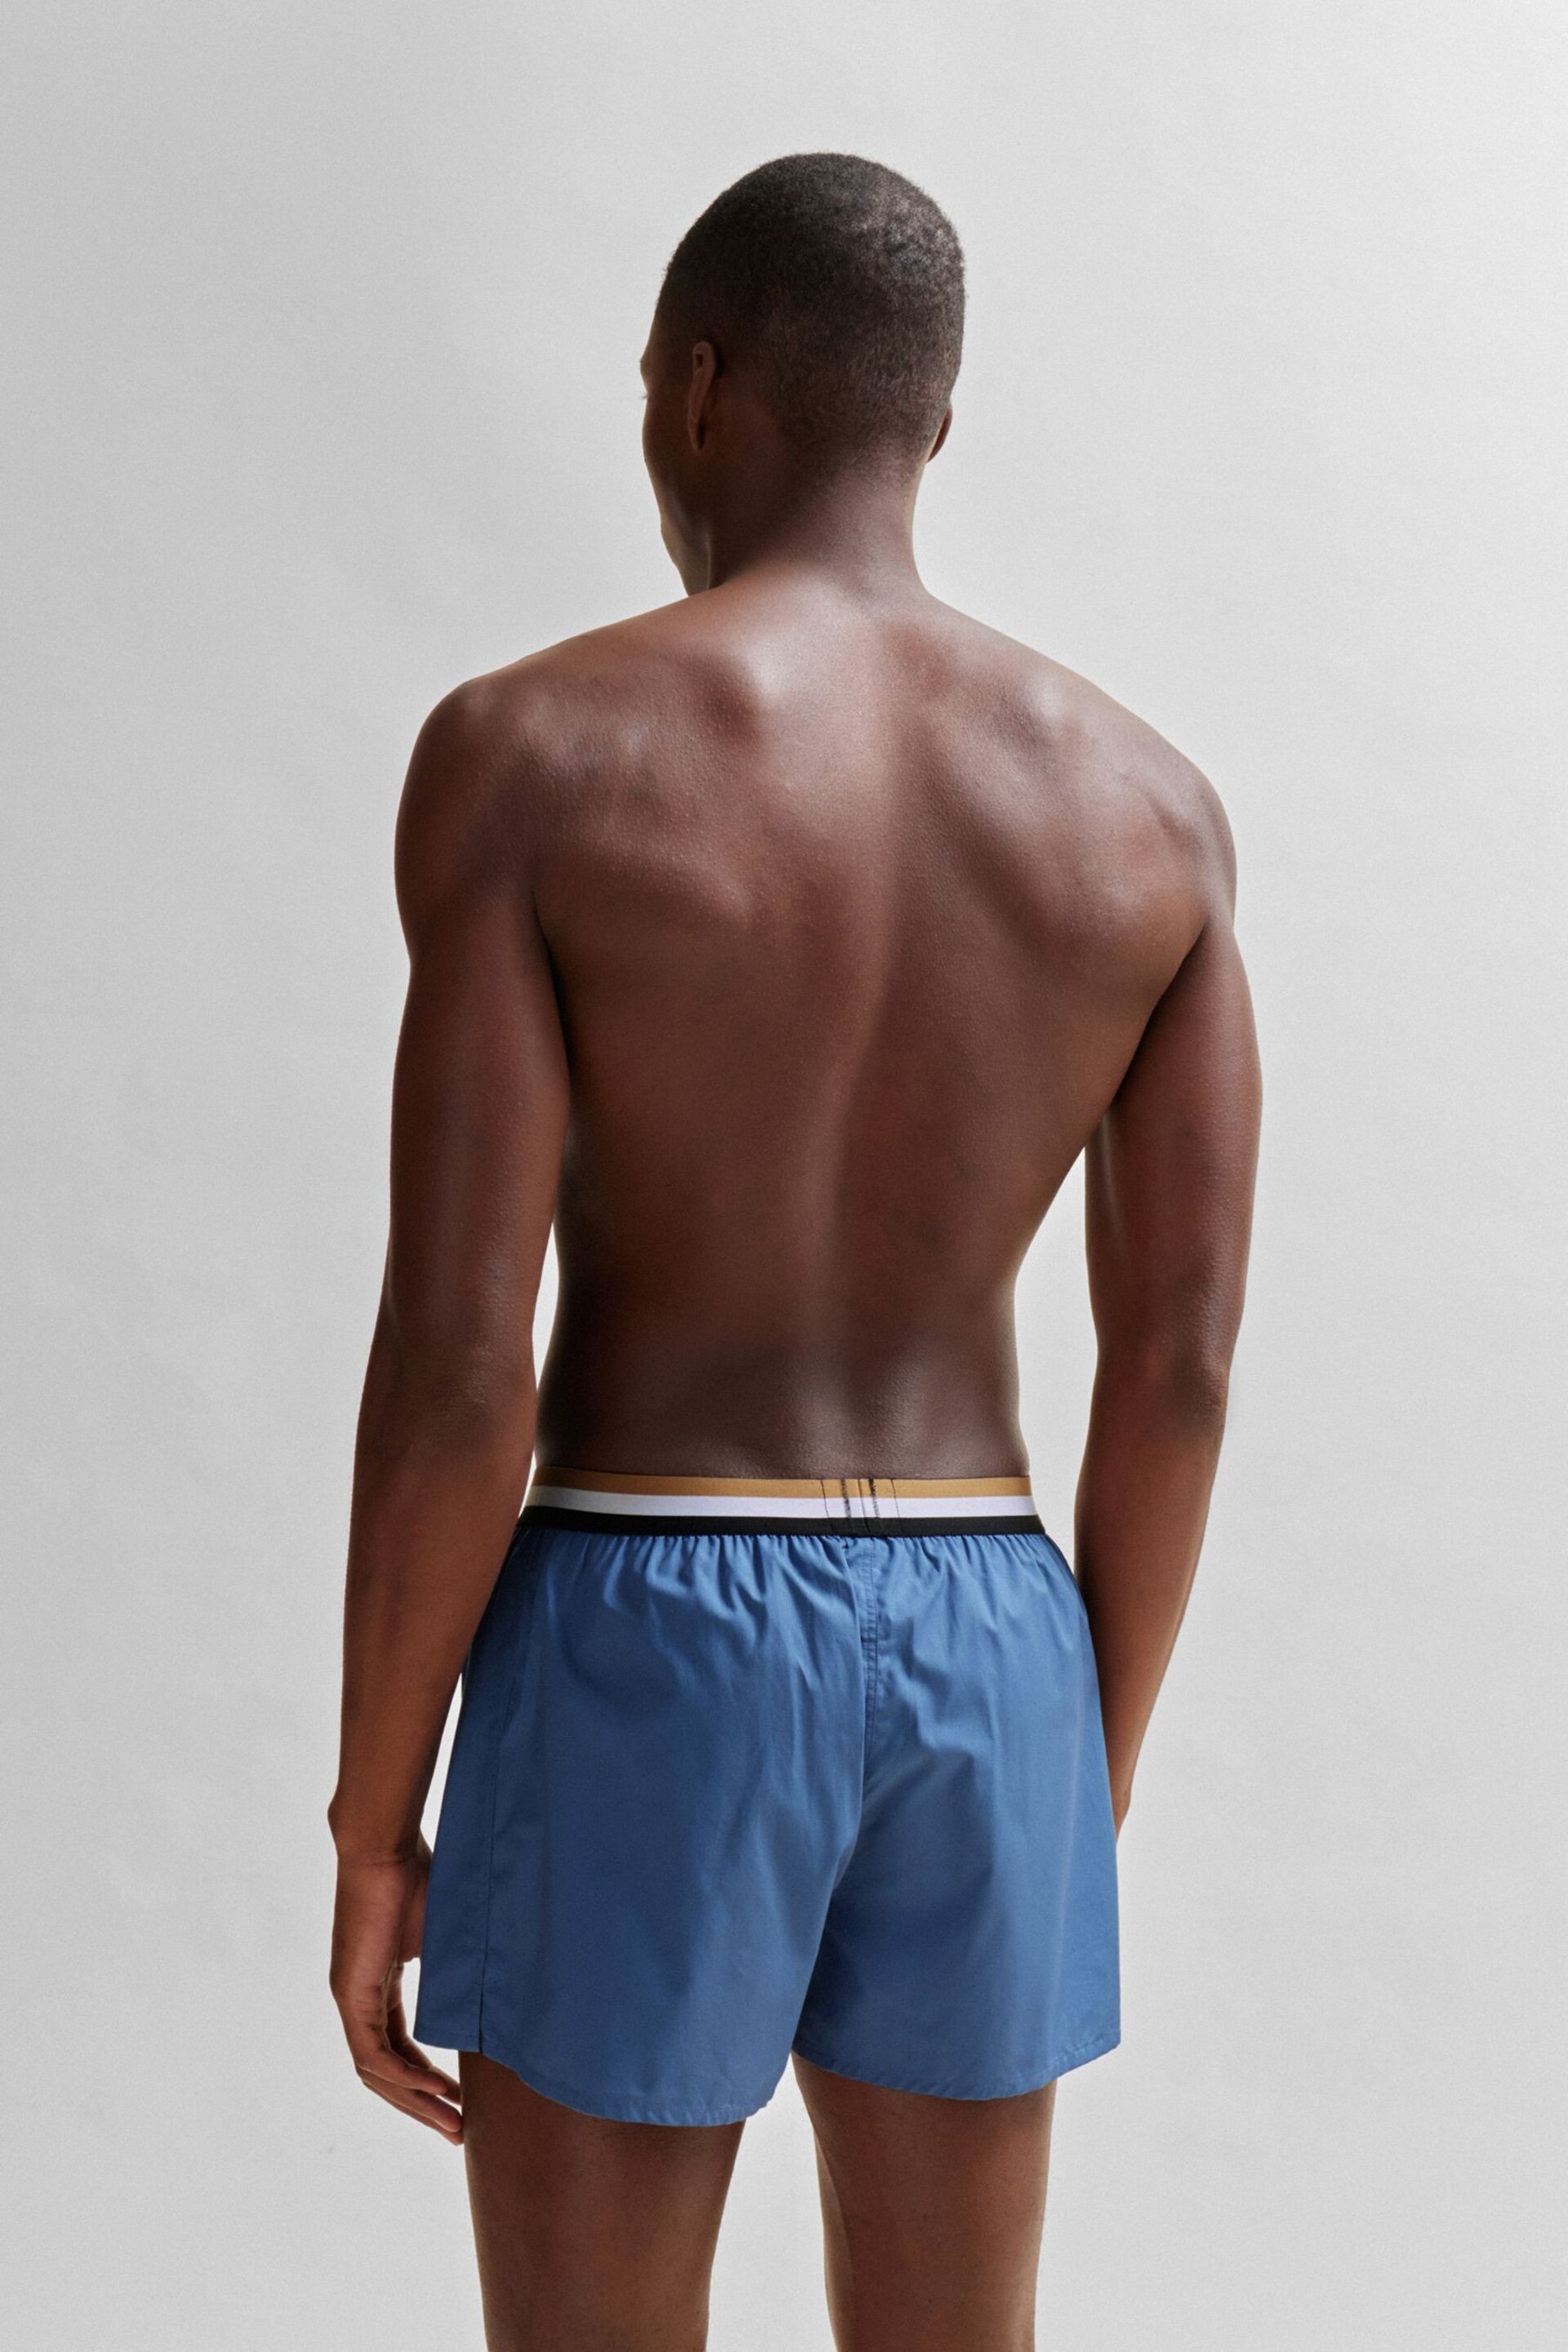 BOSS Blue Of Cotton Pyjama Shorts With Signature Waistbands 2 Pack - Image 3 of 6